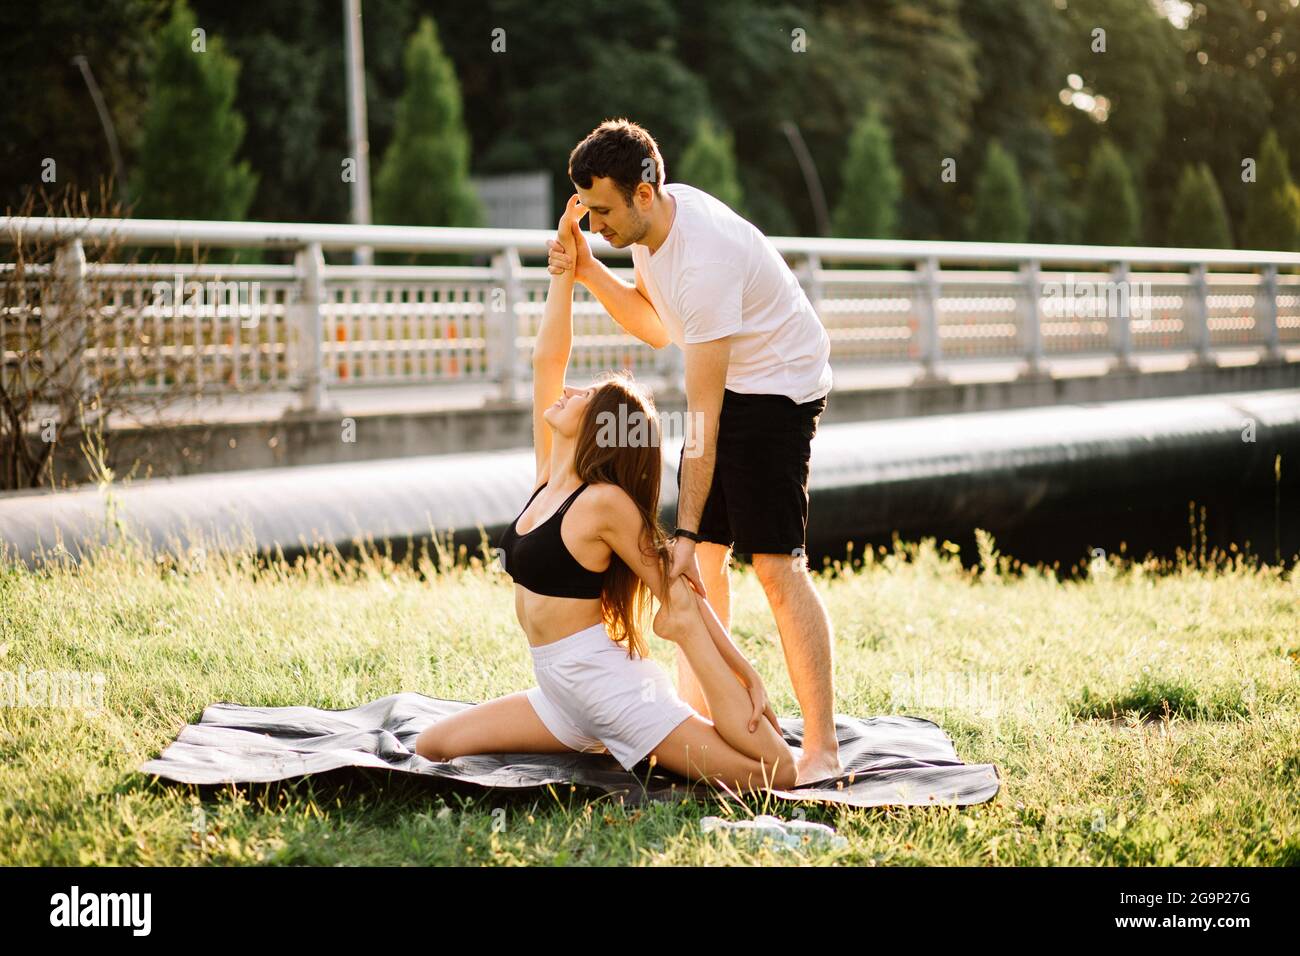 Personal Trainer Mann Coaching junge Frau, Yoga auf Stadtwiese, Sommerabend, fit Stockfoto